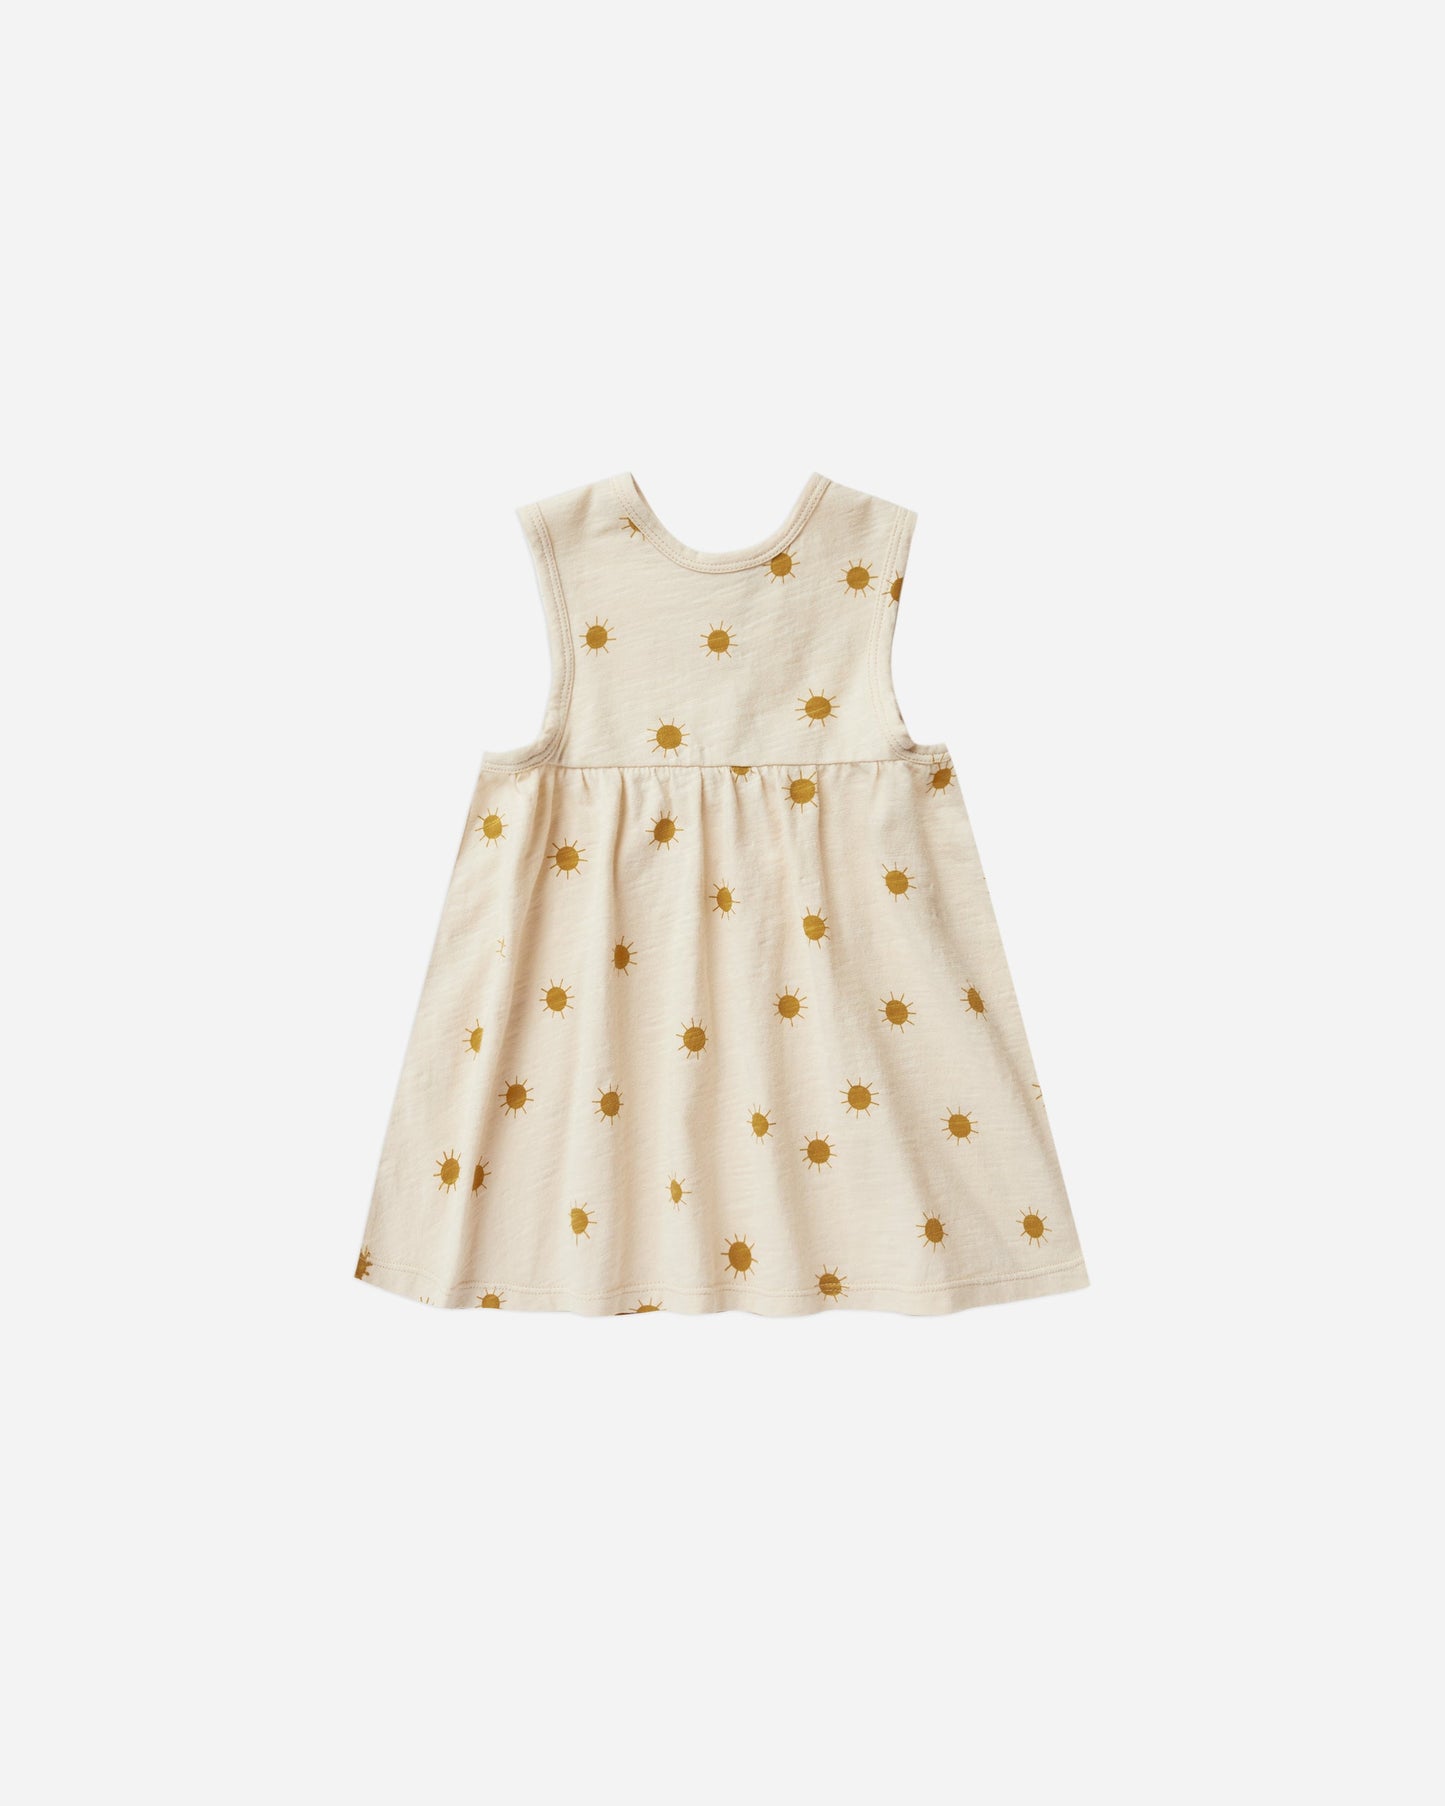 Layla Dress and Bloomers in Suns  - Doodlebug's Children's Boutique